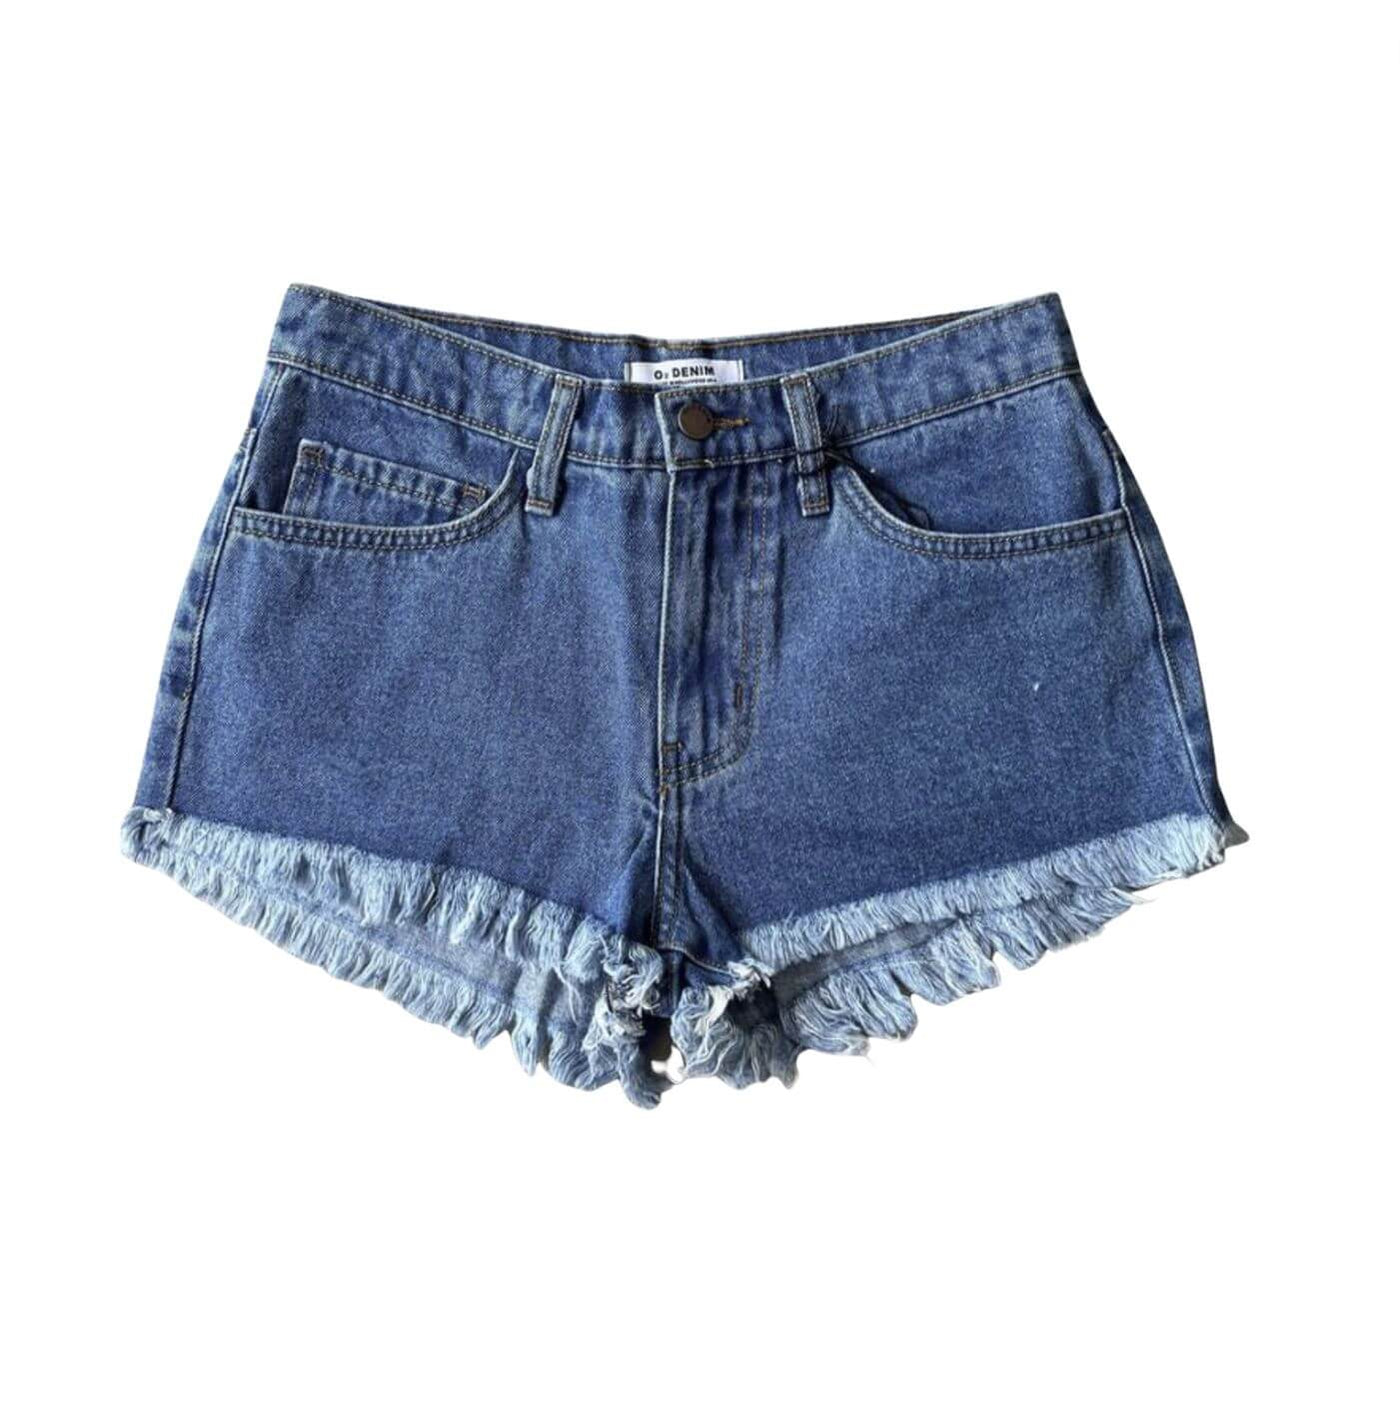 O2 Denim Ladies Classic 5 Pocket Design Denim Raw Hem Jean Shorts Style# PX7034 | Made in USA | Classy Cozy Cool Women's Made in America Boutique